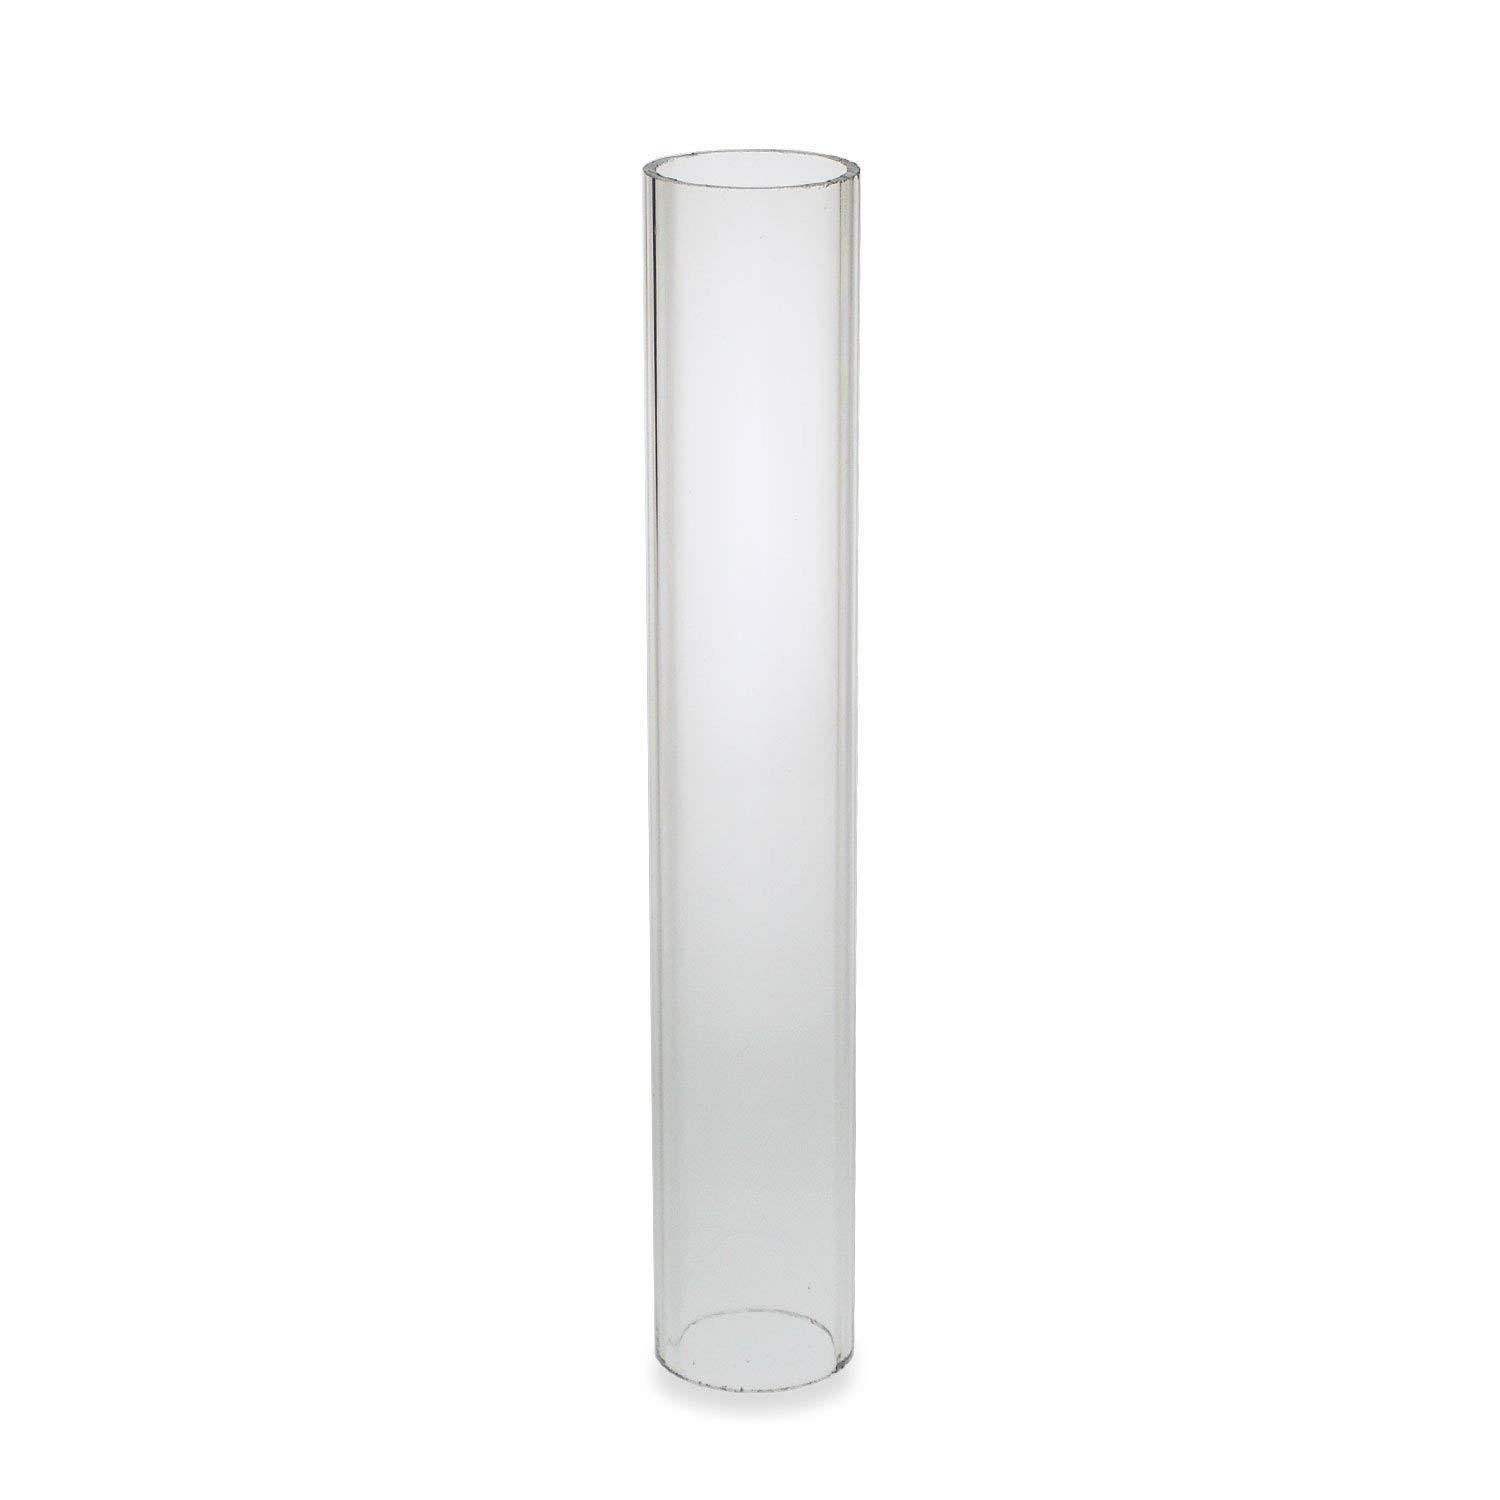 18 Recommended Glass Vases Depot Coupon 2023 free download glass vases depot coupon of amazon com source one deluxe clear acrylic tube 2 inches thick 12 in amazon com source one deluxe clear acrylic tube 2 inches thick 12 inch 2 inch wide office pro